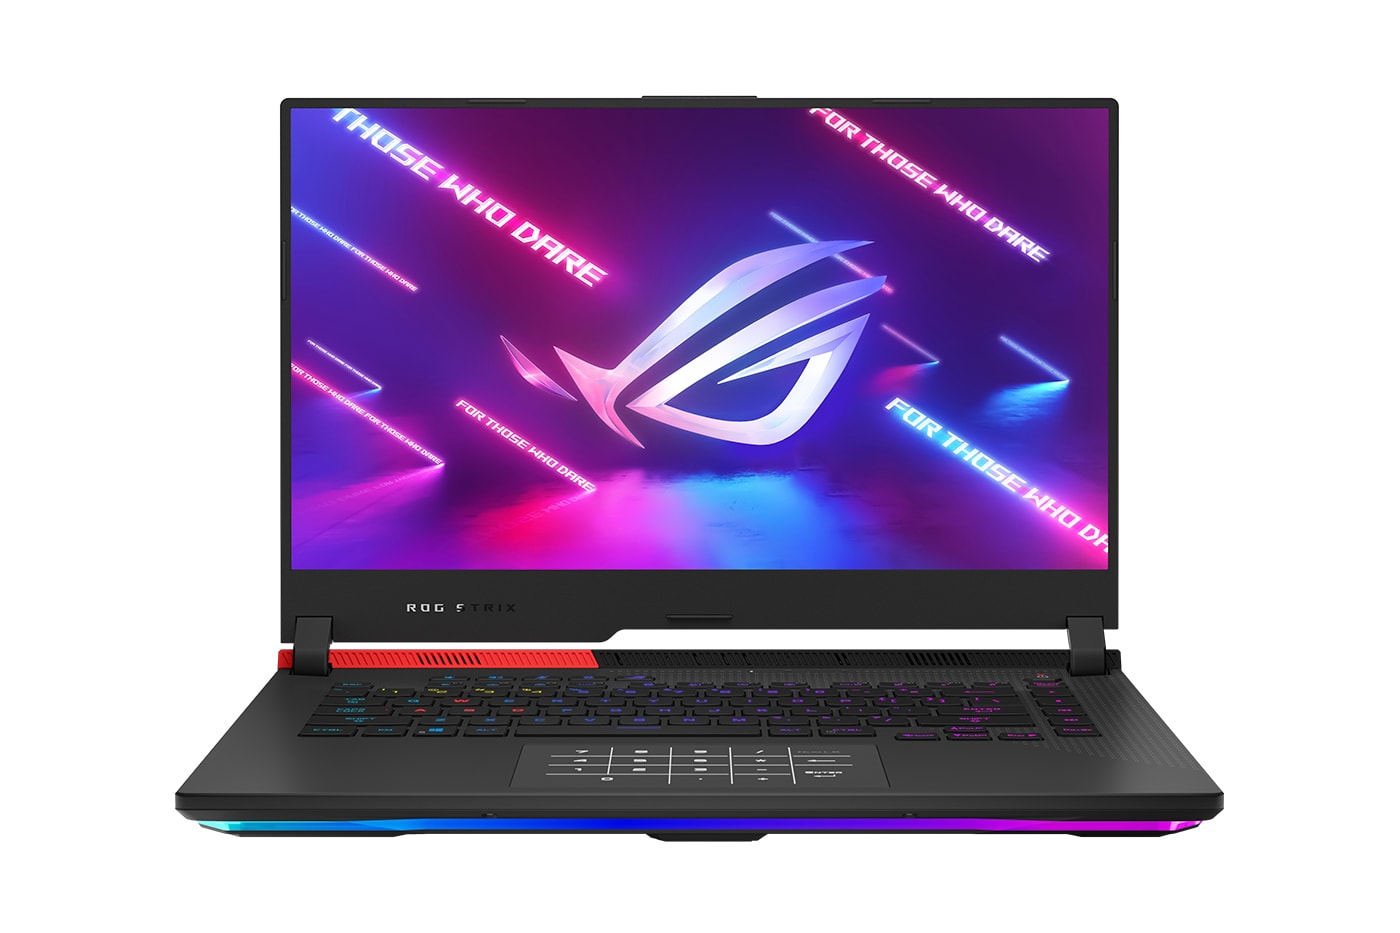 asus republic of gamers gaming laptops ces 2021 release announcements g15 x13 scar 15 17 